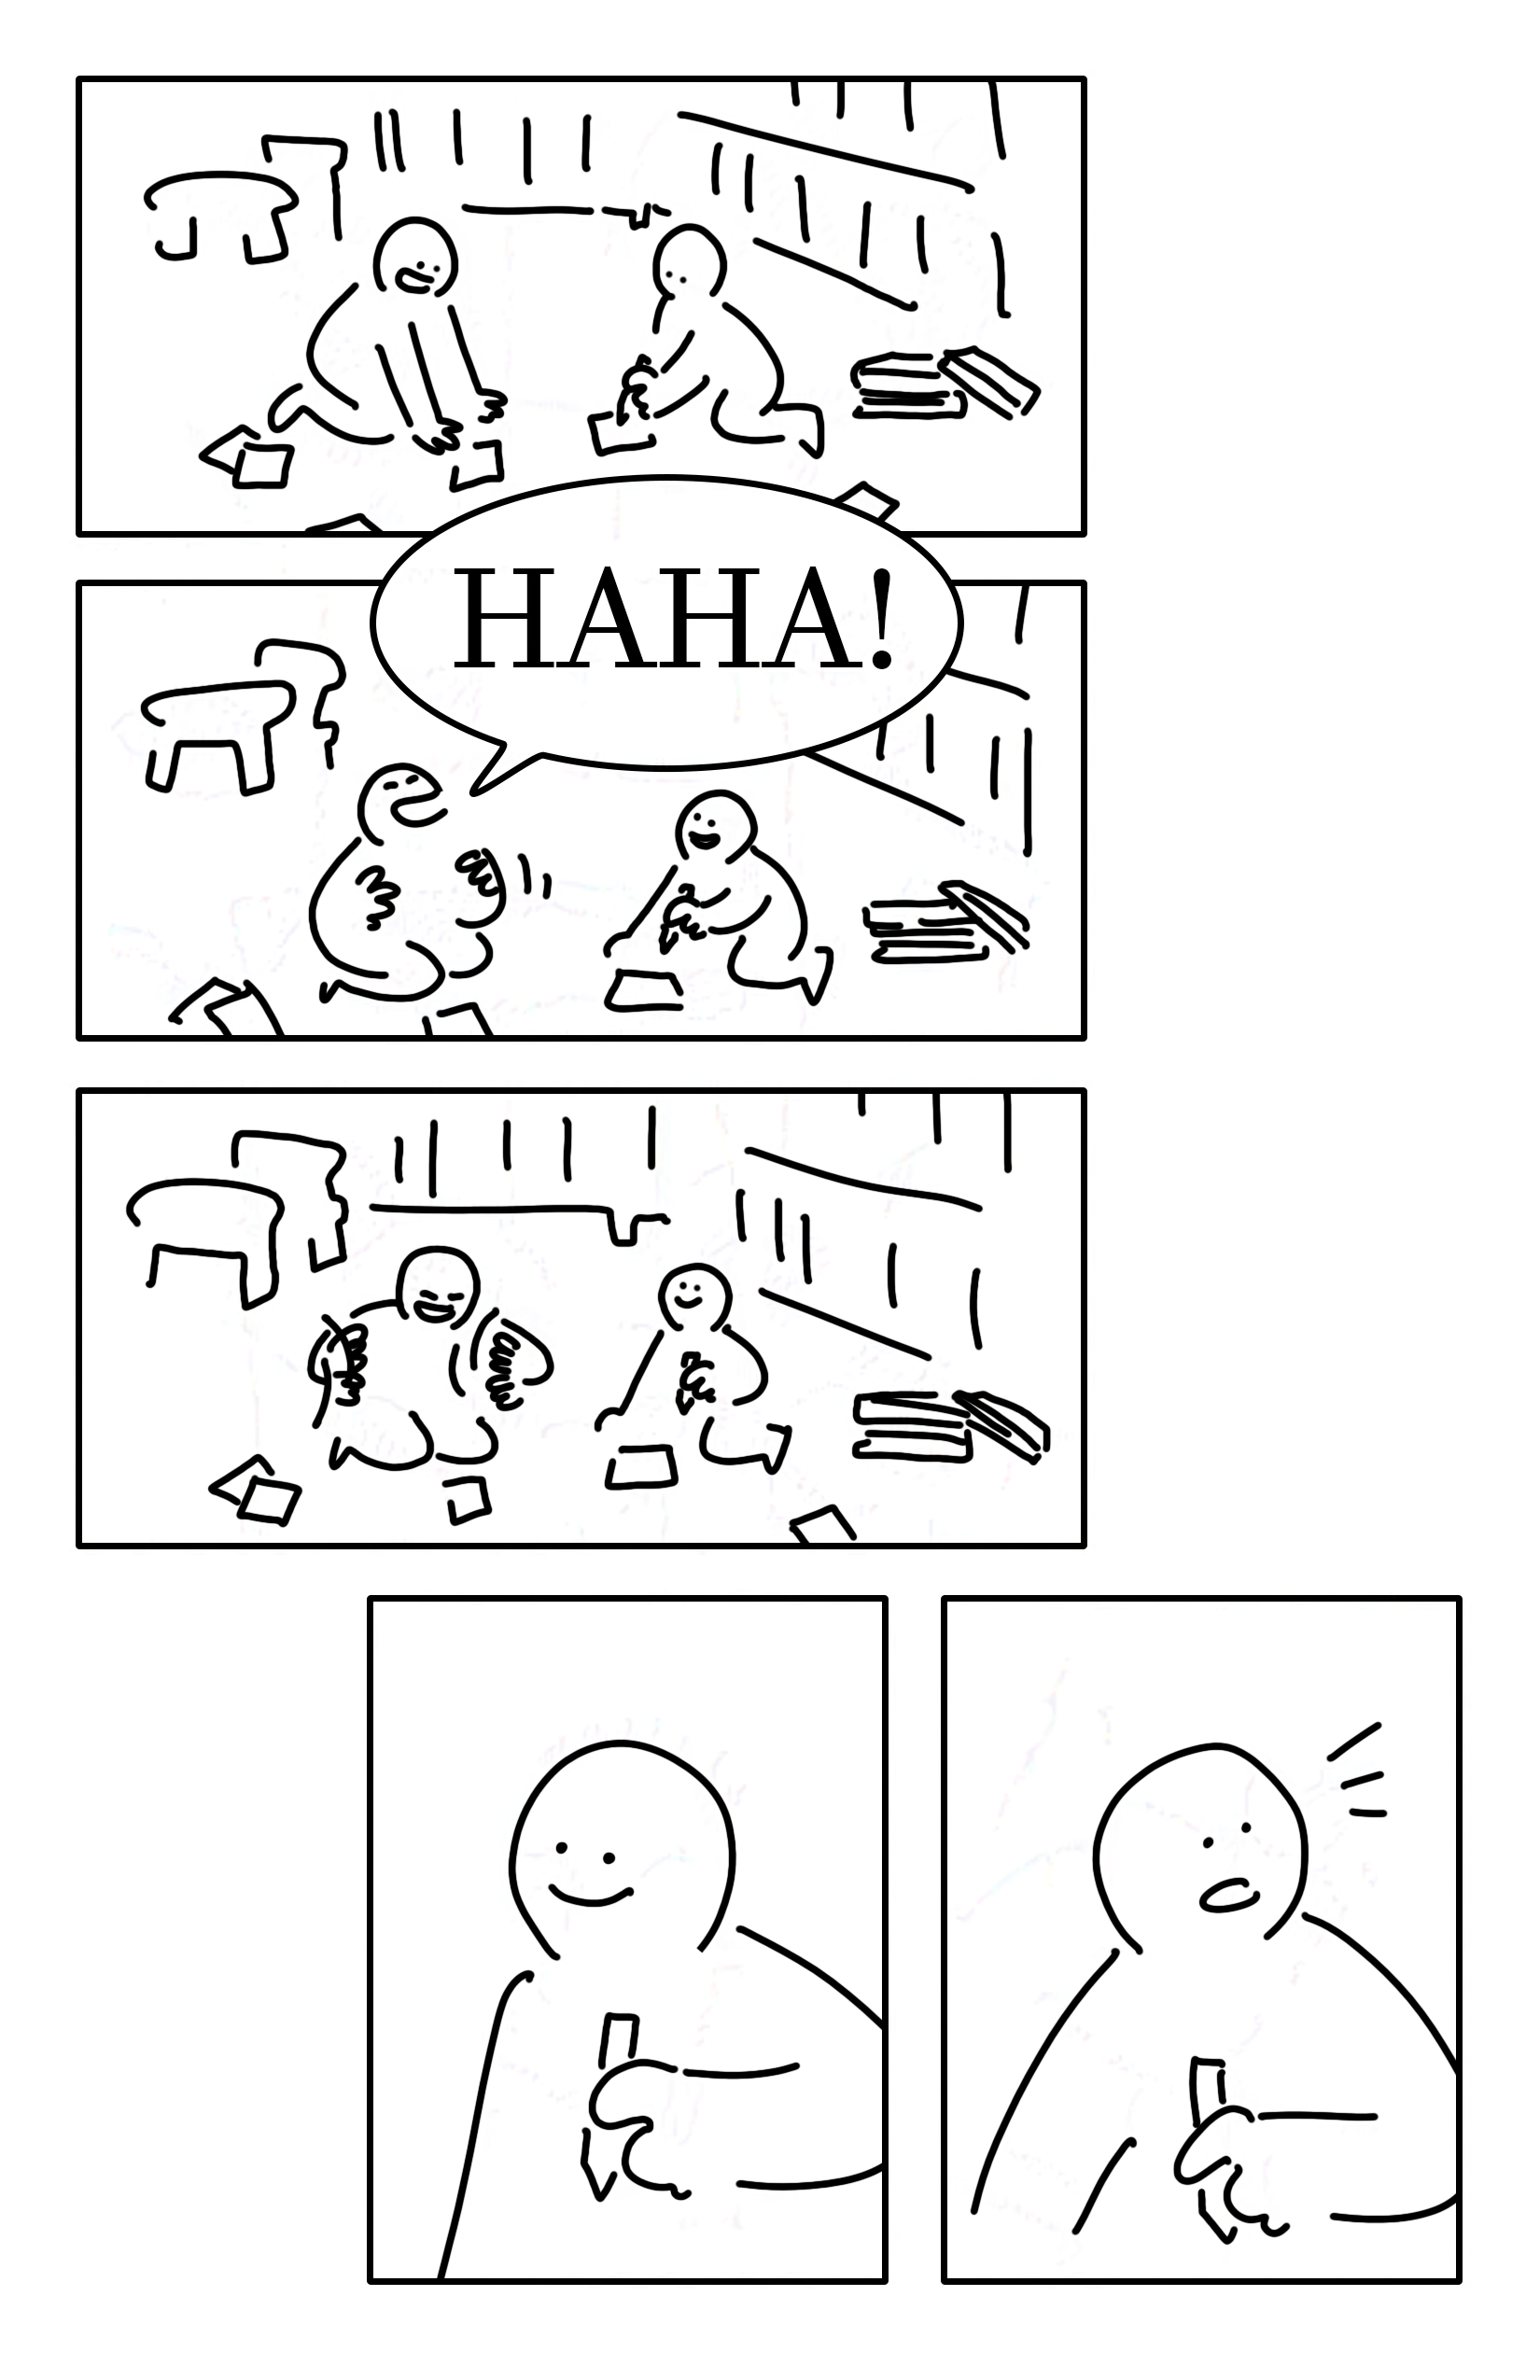 Black and white comic with simple digital drawings.
Panel 1: Two kids on the floor of a library in front of bookshelves. There are some books piled around them and scattered small pieces of paper on the ground. The kid on the right is drawing on one as the kid on the left looks down at it smiling.
Panel 2: The kid on the left bursts into loud laughter. Large text reads "HAHA!" The kid on the right looks up with a smile.
Panel 3: The kid on the right smiles as the kid on the left as they grin and flap their hands, stimming.
Panel 4: The kid on the right smiling while holding their pencil.
Panel 4: The kid on the right turning as they notice something to the right.